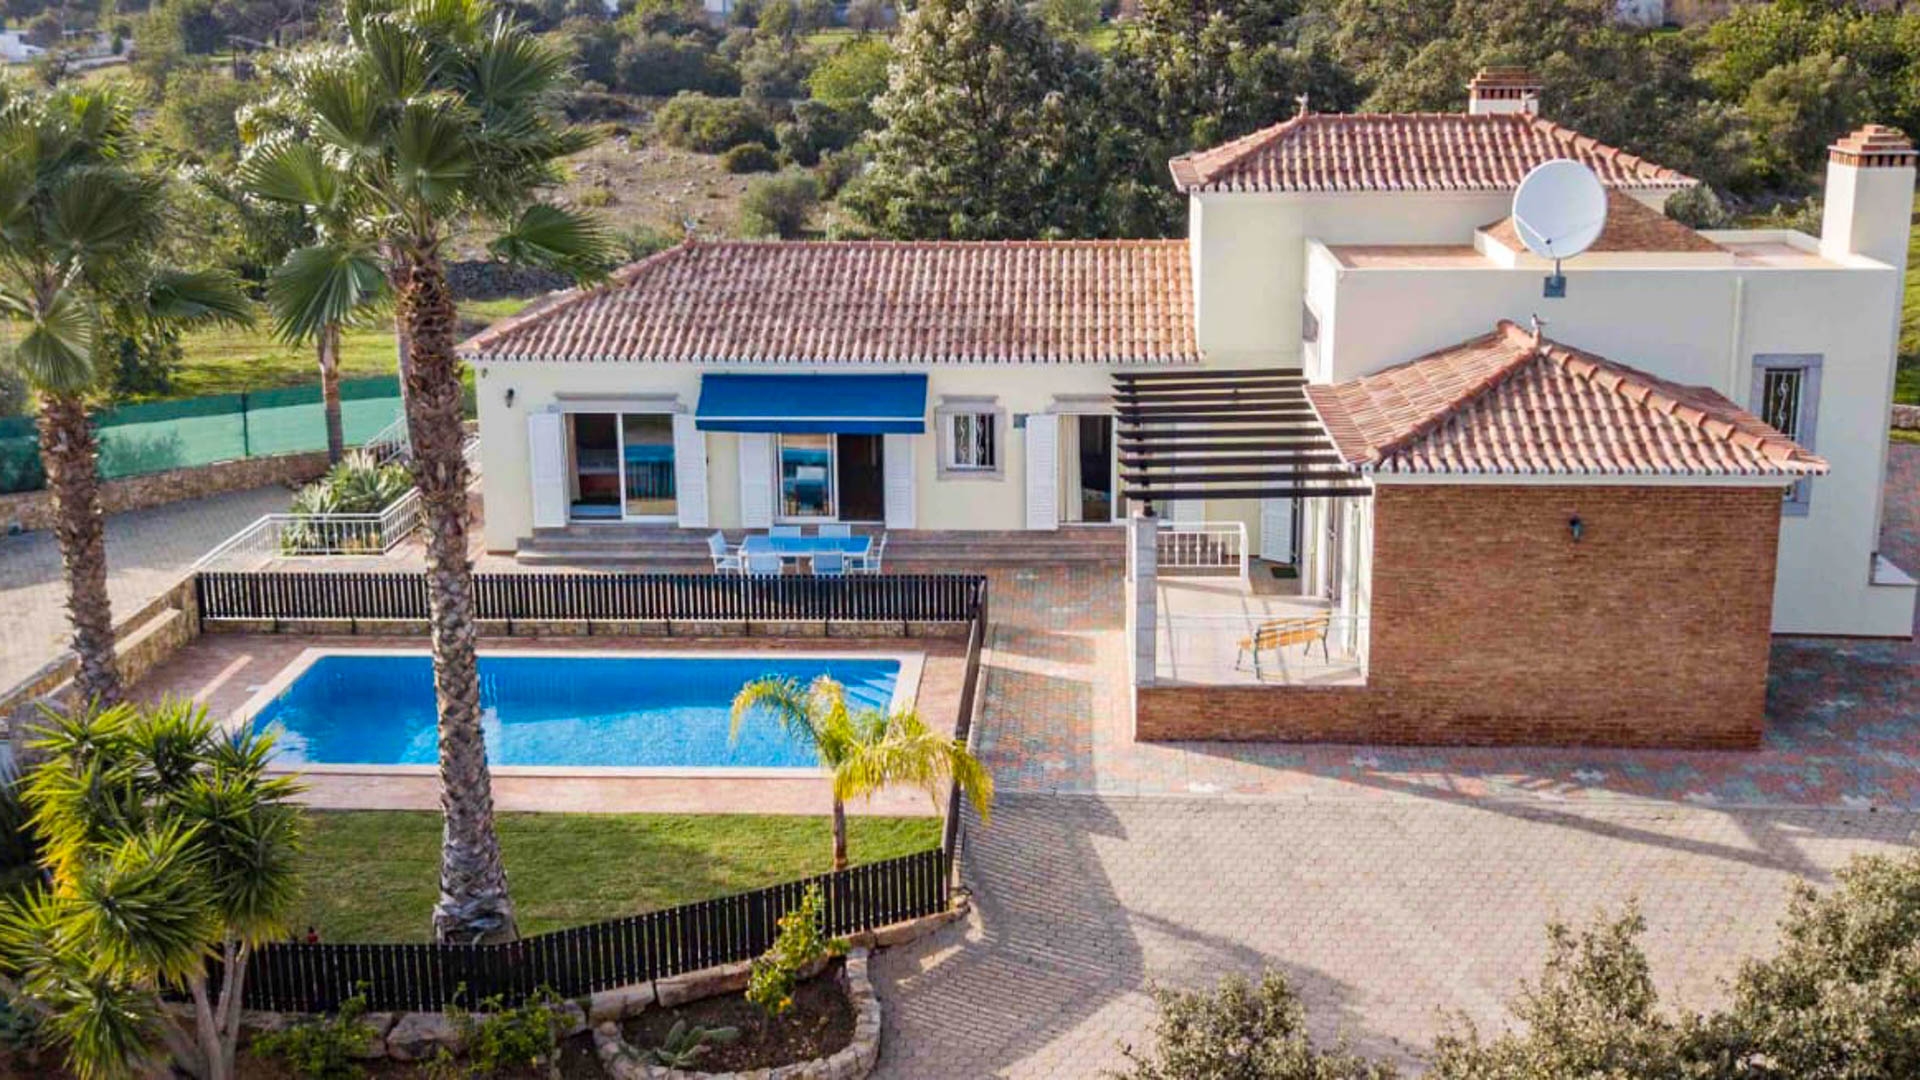 4 Bedroom Villa with Countryside views in São Brás de Alportel  | VM2068 This villa, perfect for permanent living, offers a spacious area with countryside views. Close to amenities. 